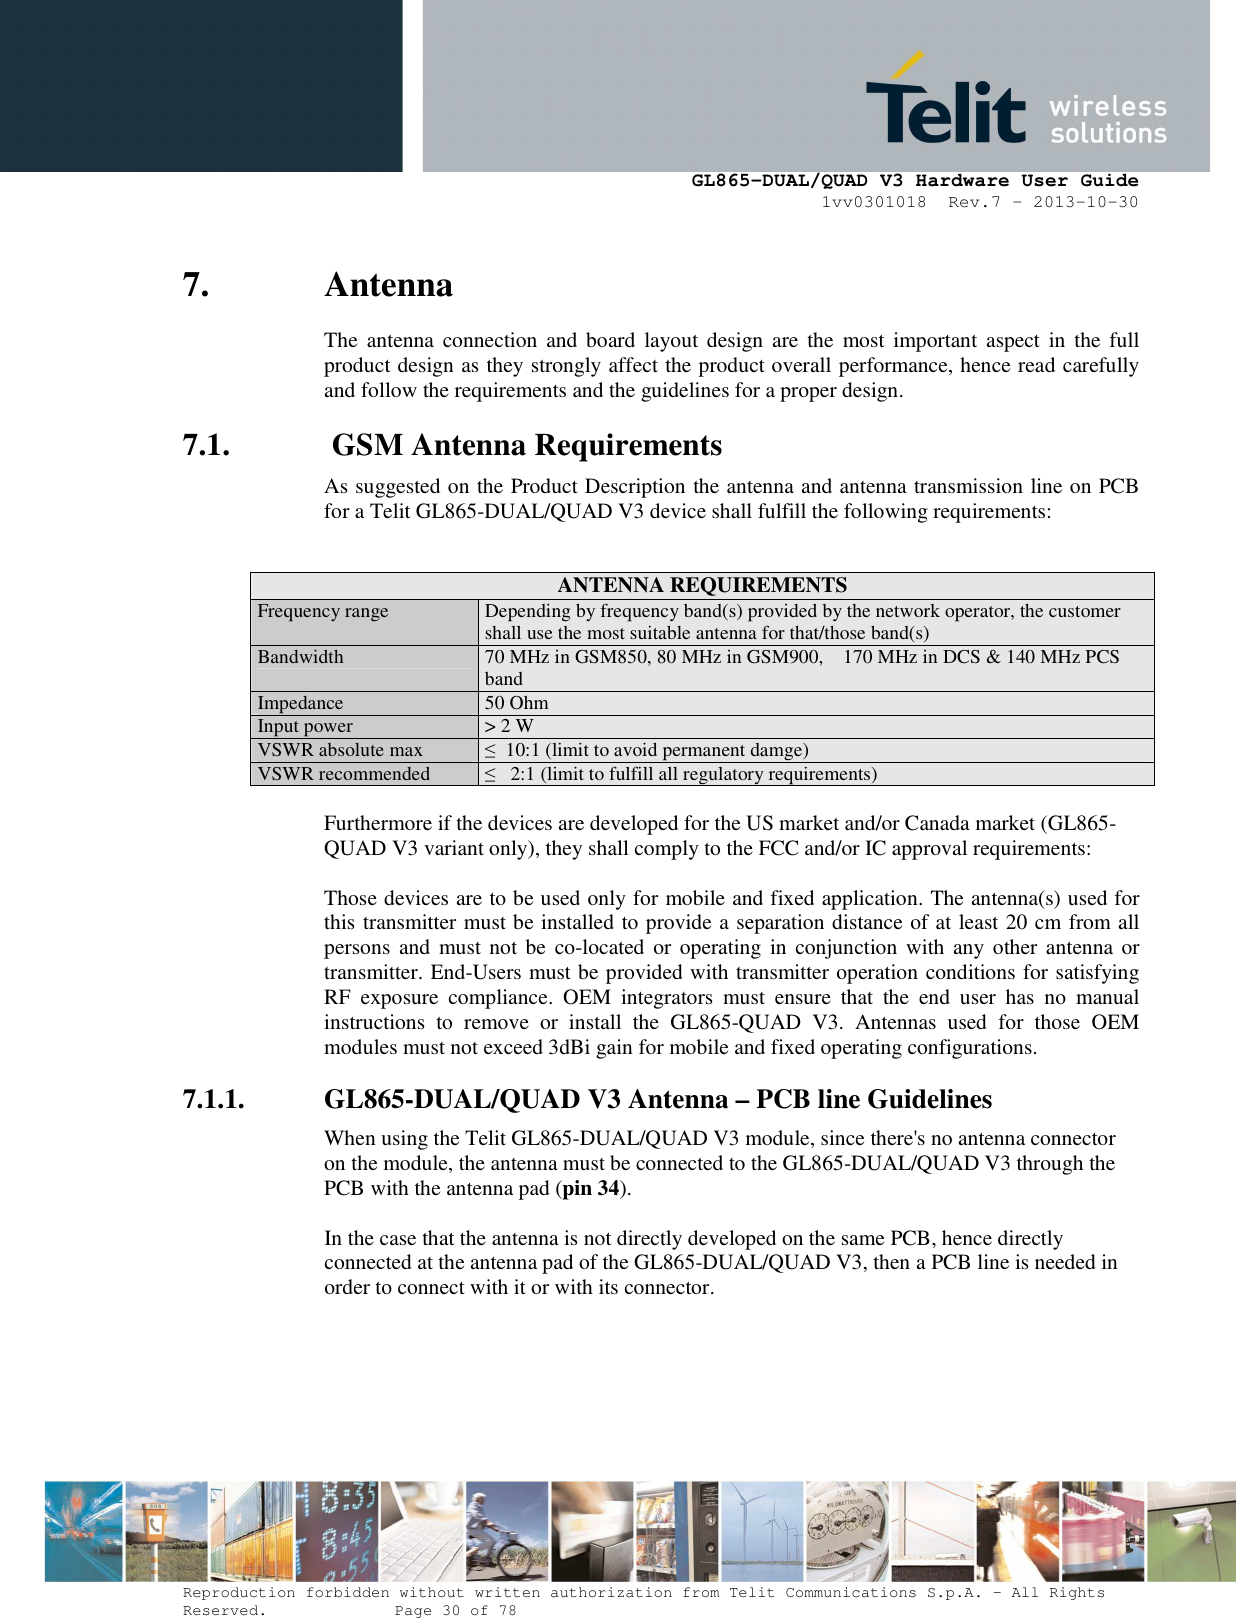      GL865-DUAL/QUAD V3 Hardware User Guide 1vv0301018  Rev.7 – 2013-10-30  Reproduction forbidden without written authorization from Telit Communications S.p.A. - All Rights Reserved.    Page 30 of 78 Mod. 0805 2011-07 Rev.2 7. Antenna The  antenna connection  and  board  layout design  are  the  most important  aspect  in  the  full product design as they strongly affect the product overall performance, hence read carefully and follow the requirements and the guidelines for a proper design. 7.1.  GSM Antenna Requirements As suggested on the Product Description the antenna and antenna transmission line on PCB for a Telit GL865-DUAL/QUAD V3 device shall fulfill the following requirements:   ANTENNA REQUIREMENTS Frequency range  Depending by frequency band(s) provided by the network operator, the customer shall use the most suitable antenna for that/those band(s) Bandwidth  70 MHz in GSM850, 80 MHz in GSM900,    170 MHz in DCS &amp; 140 MHz PCS band Impedance 50 Ohm Input power &gt; 2 W VSWR absolute max  ≤  10:1 (limit to avoid permanent damge) VSWR recommended  ≤   2:1 (limit to fulfill all regulatory requirements)  Furthermore if the devices are developed for the US market and/or Canada market (GL865-QUAD V3 variant only), they shall comply to the FCC and/or IC approval requirements:  Those devices are to be used only for mobile and fixed application. The antenna(s) used for this transmitter must be installed to provide a separation distance of at least 20 cm from all persons  and  must not be  co-located  or  operating  in  conjunction  with any other  antenna or transmitter. End-Users must be provided with transmitter operation conditions for satisfying RF  exposure  compliance.  OEM  integrators  must  ensure  that  the  end  user  has  no  manual instructions  to  remove  or  install  the  GL865-QUAD  V3.  Antennas  used  for  those  OEM modules must not exceed 3dBi gain for mobile and fixed operating configurations. 7.1.1. GL865-DUAL/QUAD V3 Antenna – PCB line Guidelines When using the Telit GL865-DUAL/QUAD V3 module, since there&apos;s no antenna connector on the module, the antenna must be connected to the GL865-DUAL/QUAD V3 through the PCB with the antenna pad (pin 34).  In the case that the antenna is not directly developed on the same PCB, hence directly connected at the antenna pad of the GL865-DUAL/QUAD V3, then a PCB line is needed in order to connect with it or with its connector.  